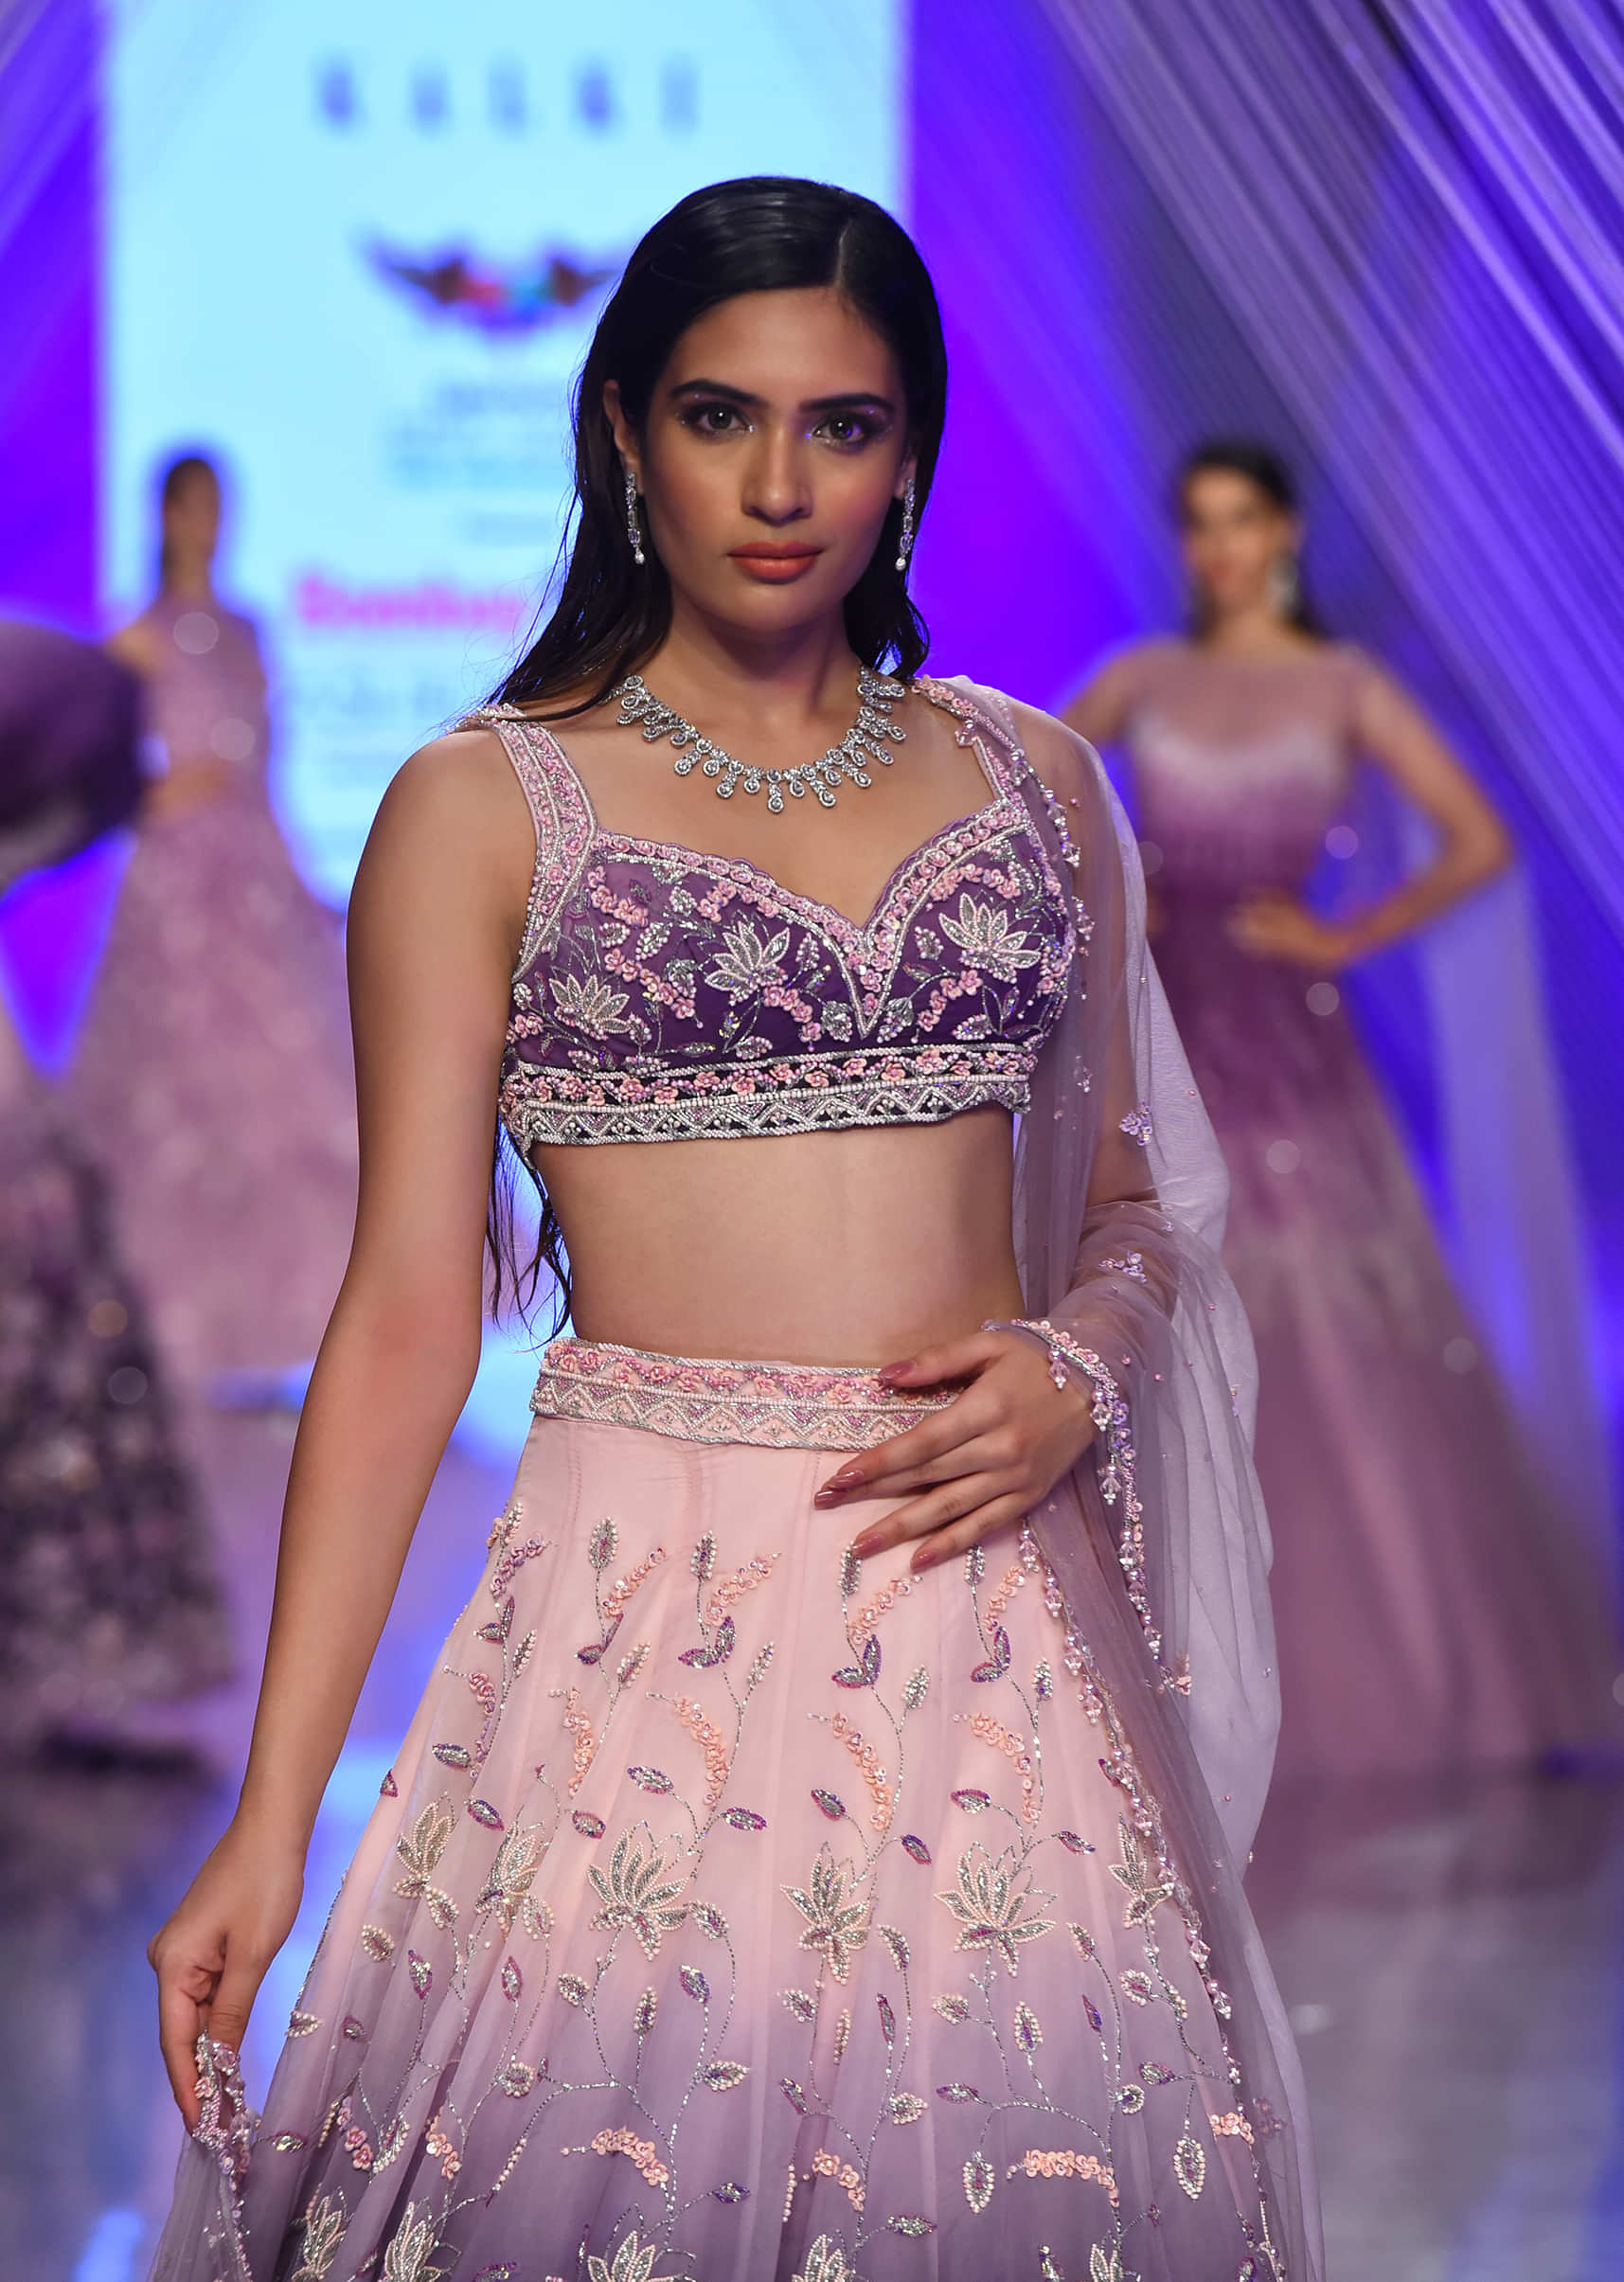 Lavender Ombre Lehenga With The Crop Top In Surface Embroidery